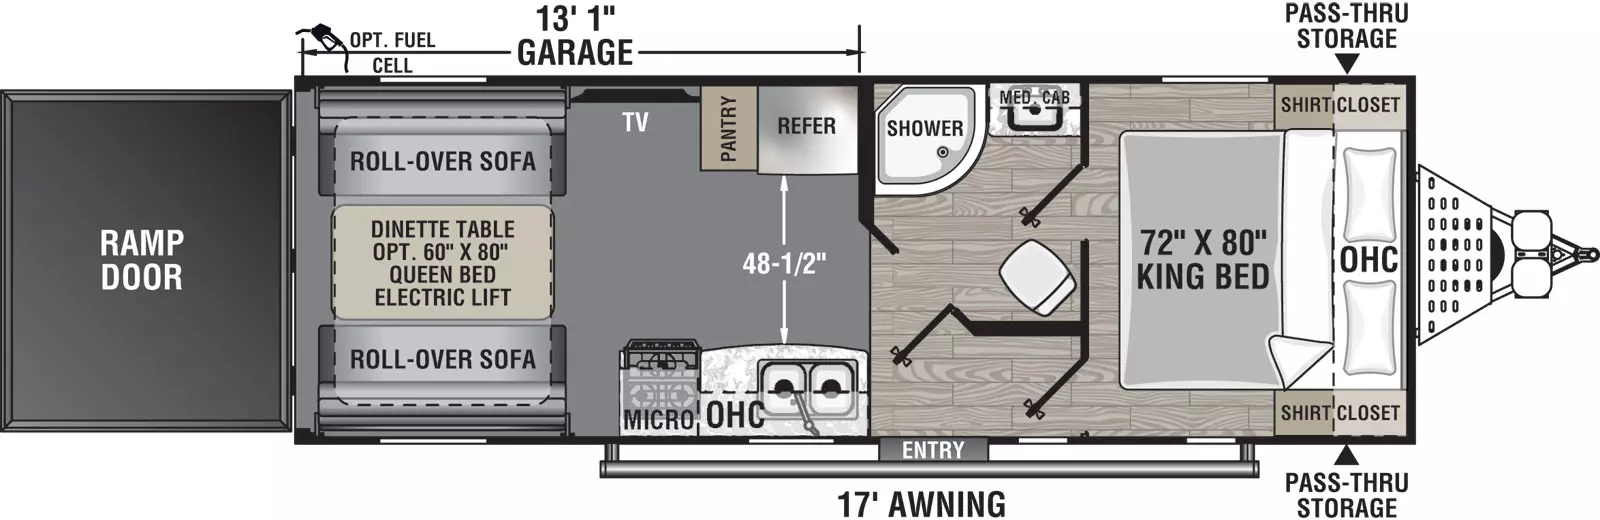 The 23LT has no slide outs and one entry door on the door side. Interior layout from front to back: front bedroom with side- facing king bed and overhead cabinet; walk through bathroom on off door side; kitchen living dining area; door side kitchen containing double basin sink, overhead cabinet, cook top stove, and overhead microwave; off-door side refrigerator and pantry; and television; one roll-over sofa on the door side and one roll-over sofa on the off-door side of the unit; dinette table; and rear ramp door.